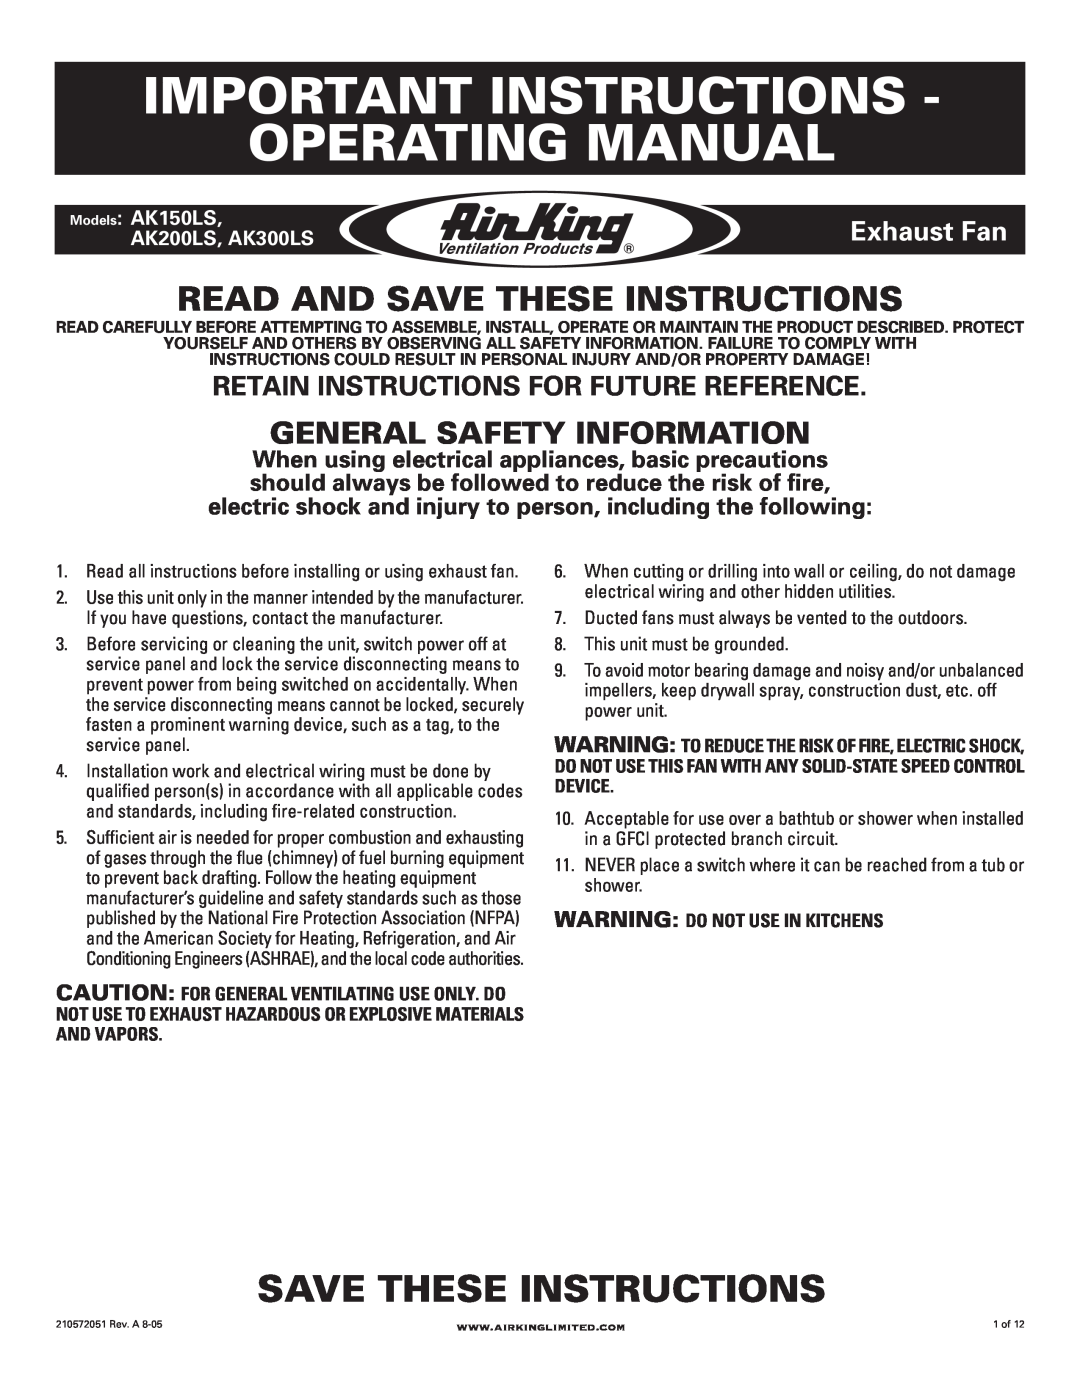 Air King AK300LS manual Important Instructions Operating Manual, Read And Save These Instructions, Exhaust Fan 